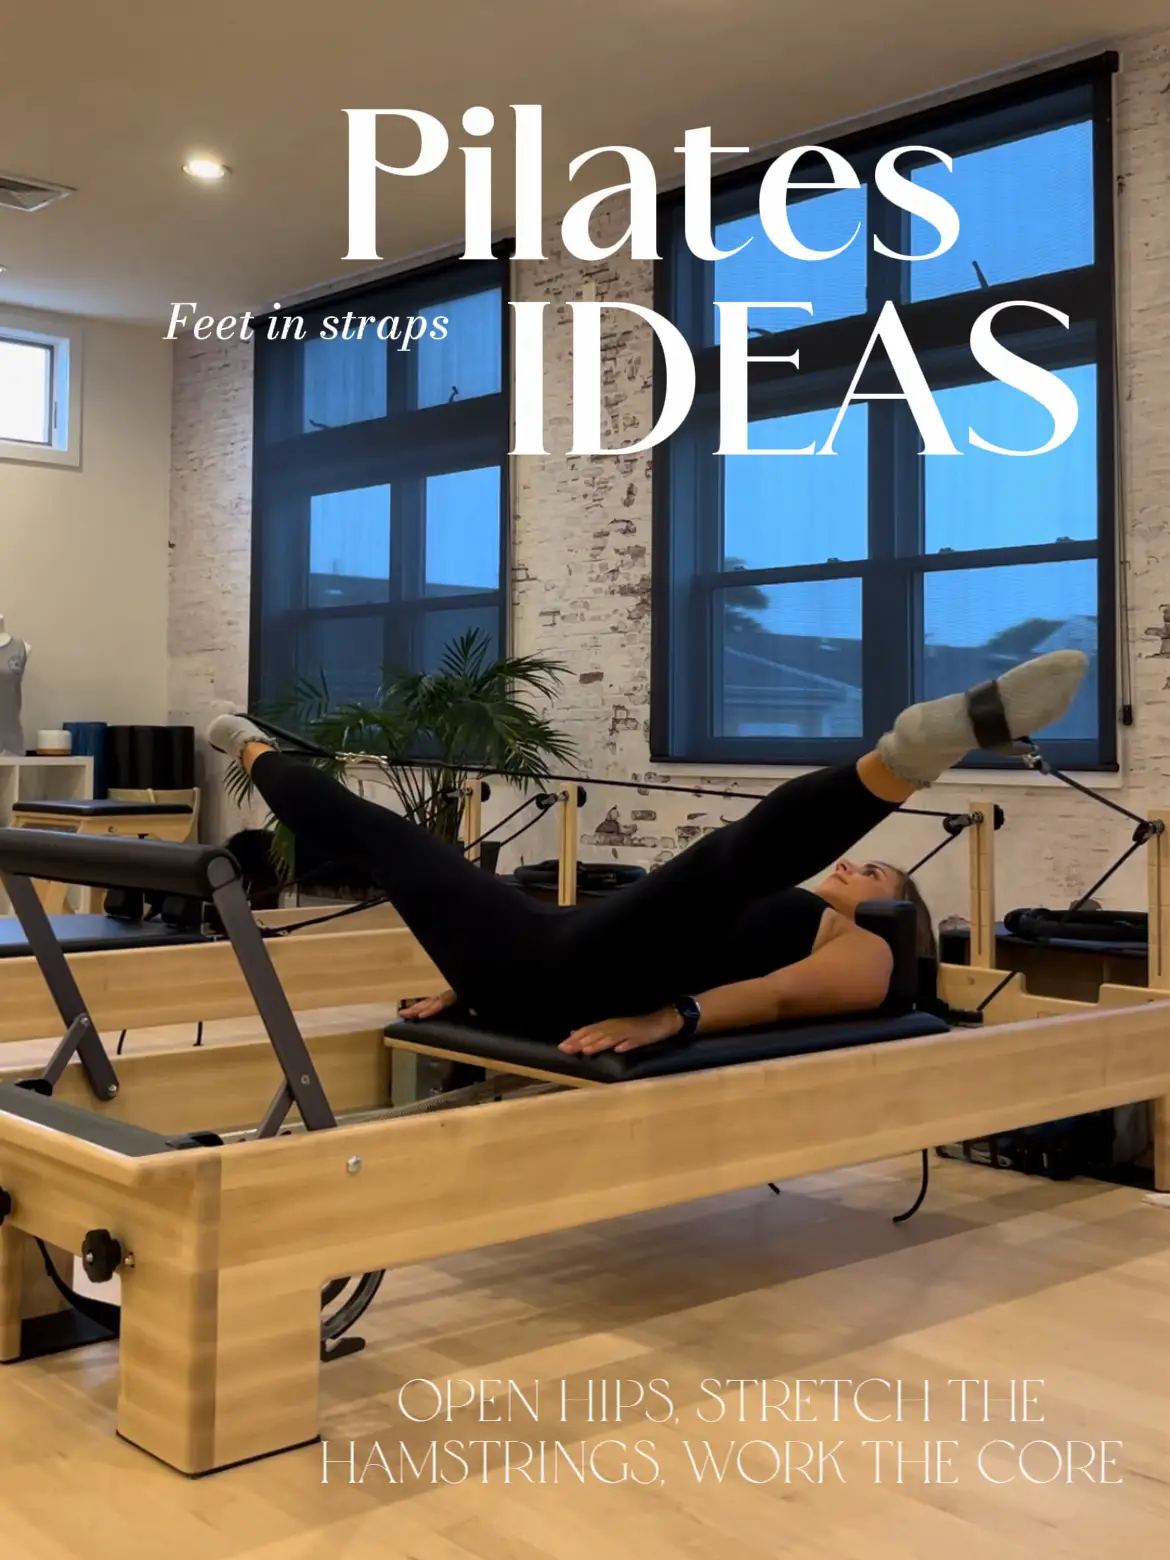 PILATES feet in straps 😍✨, Video published by Meredith